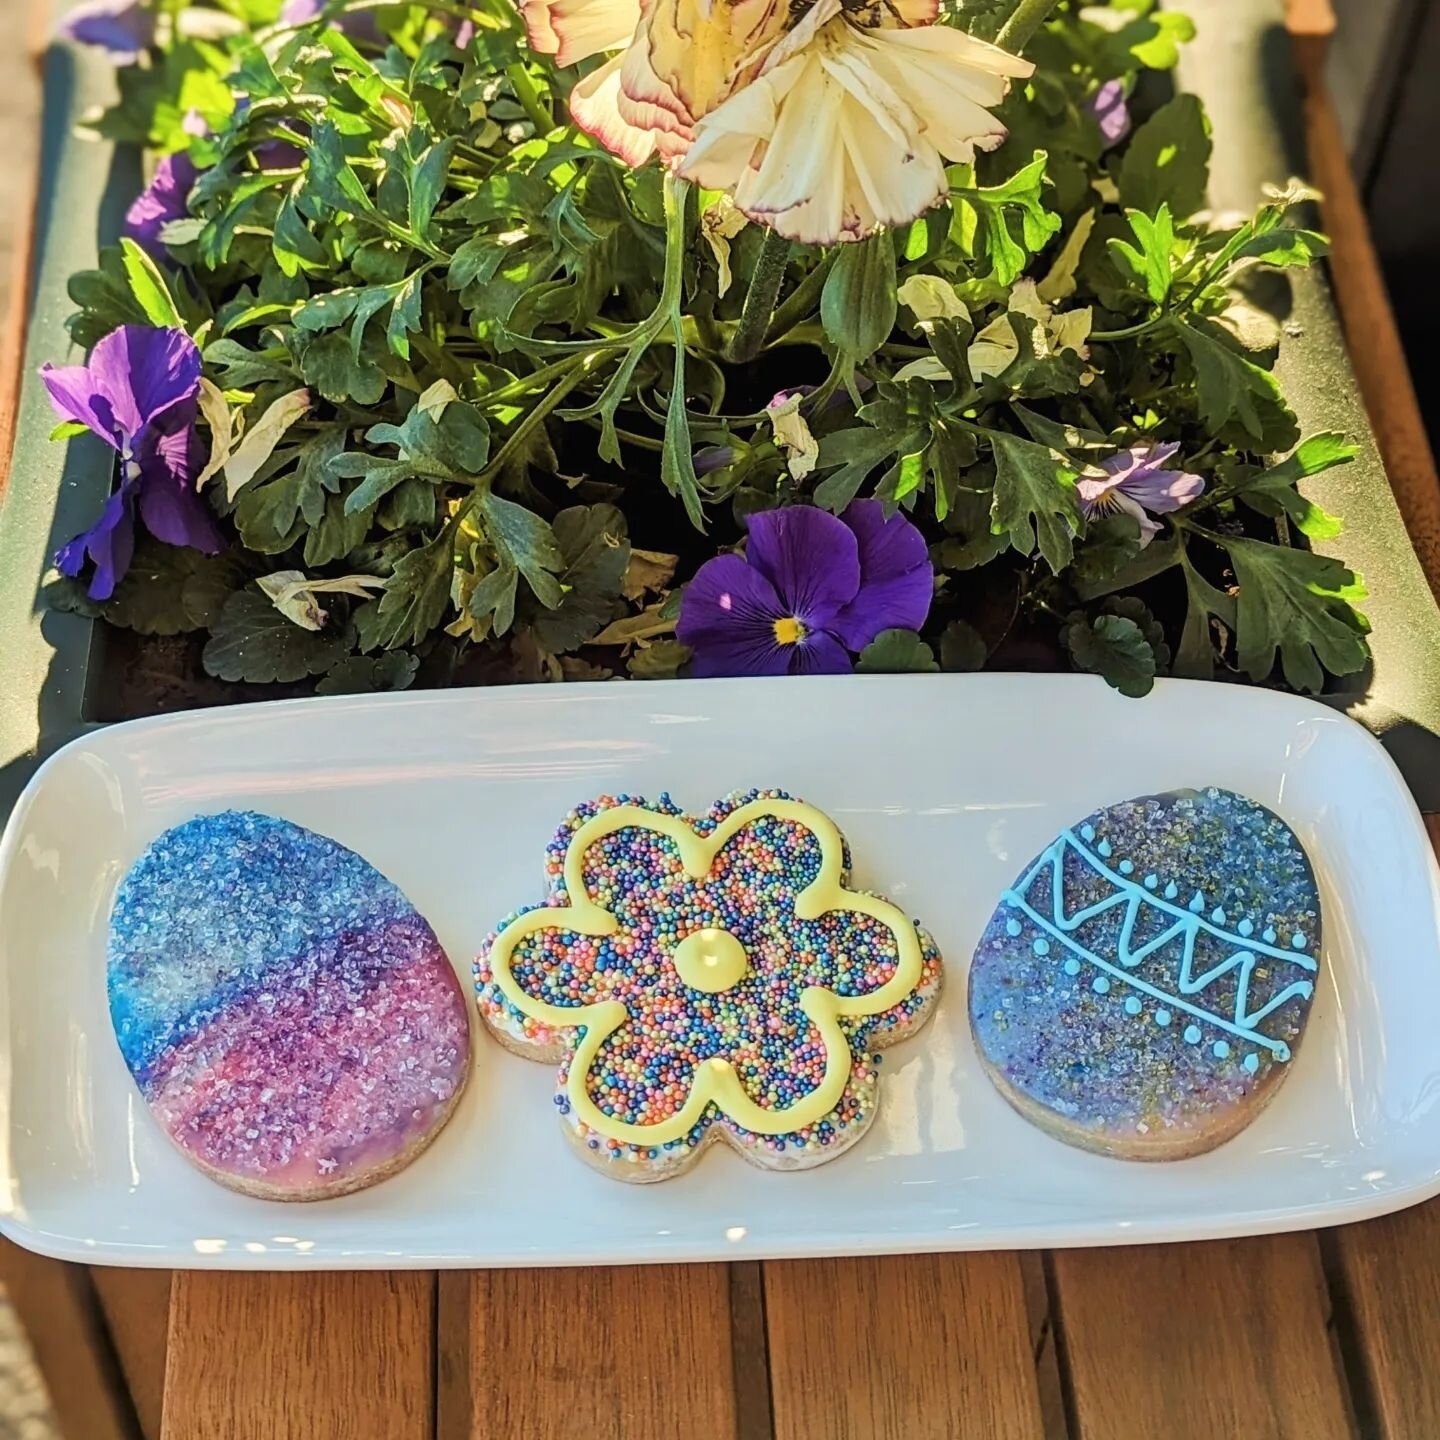 Hi! It's been a busy morning already so no fancy Instagram post today. Here's a peak at some of the springtime goodies we are offering this weekend. Dyed Easter egg sugar cookies and gf Cadbury mini egg mini cheesecakes. Omnomnomnom

#eastercookies #